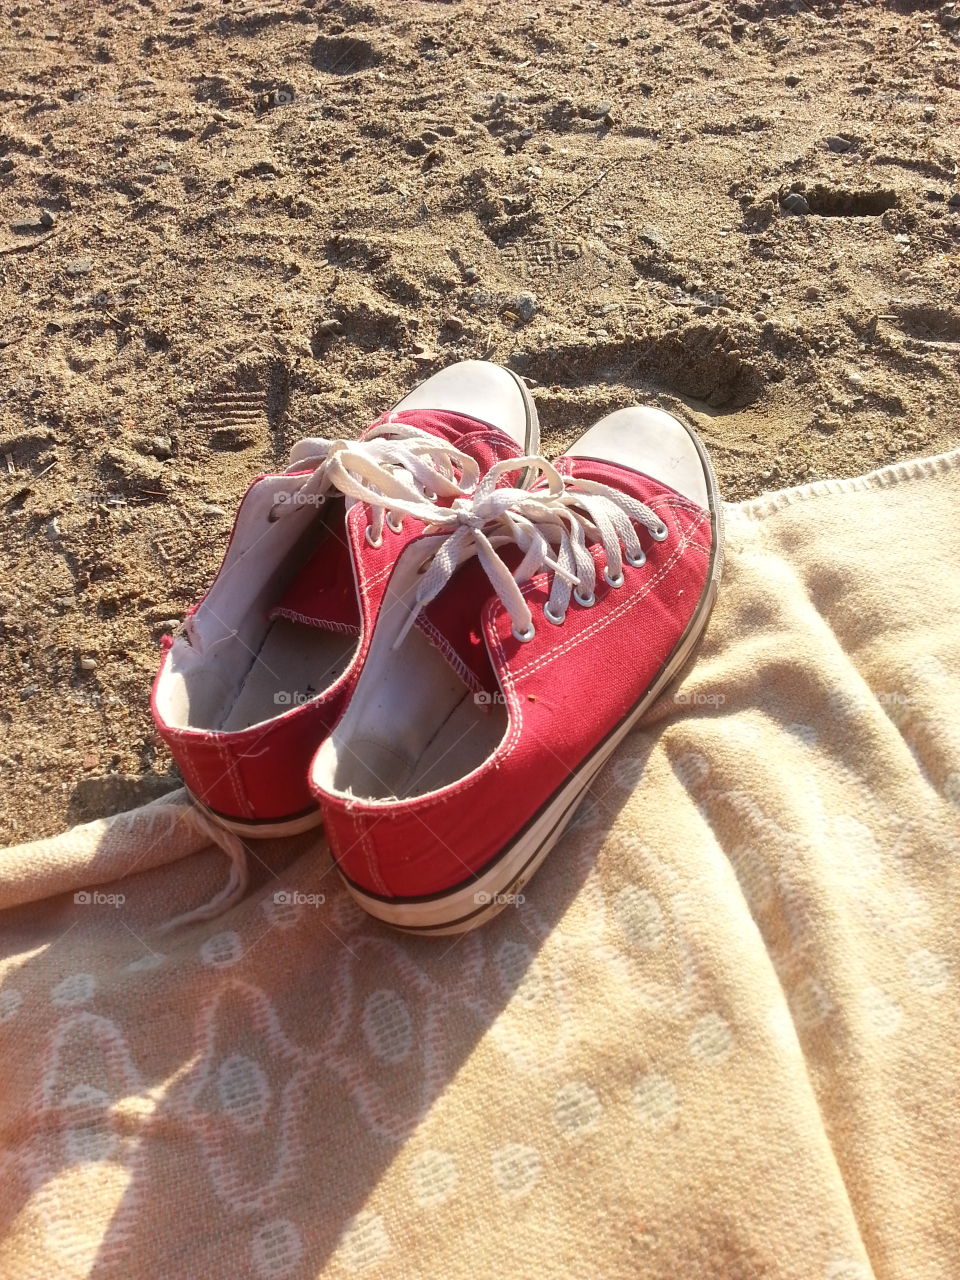 shoes on The shore